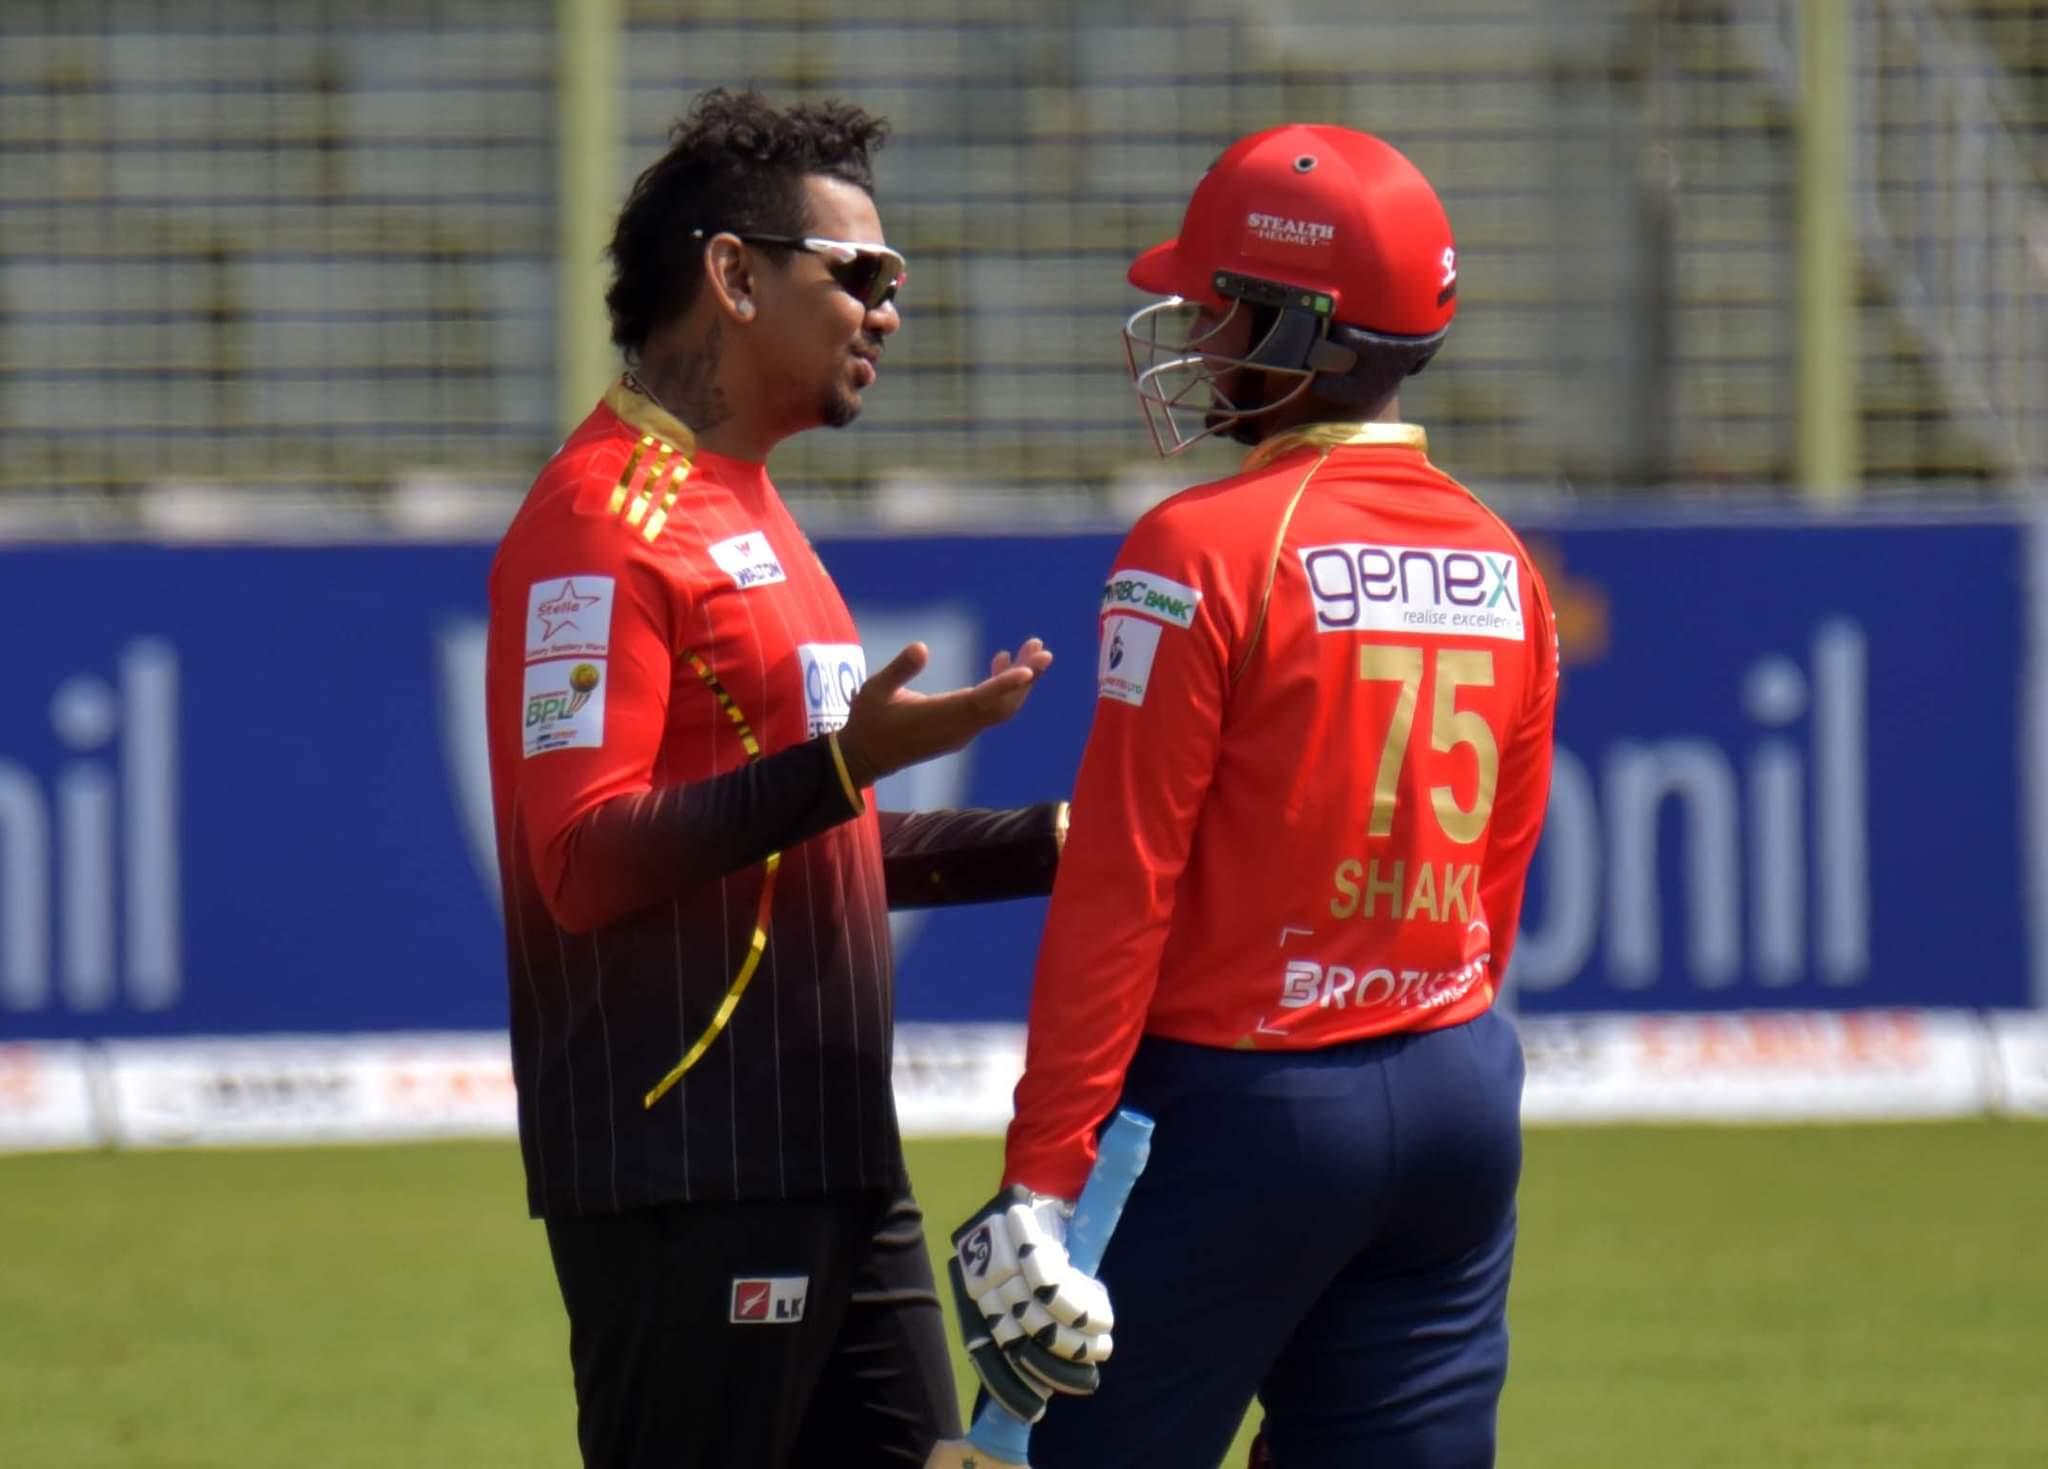 BPL is more than competitive over all: Narine